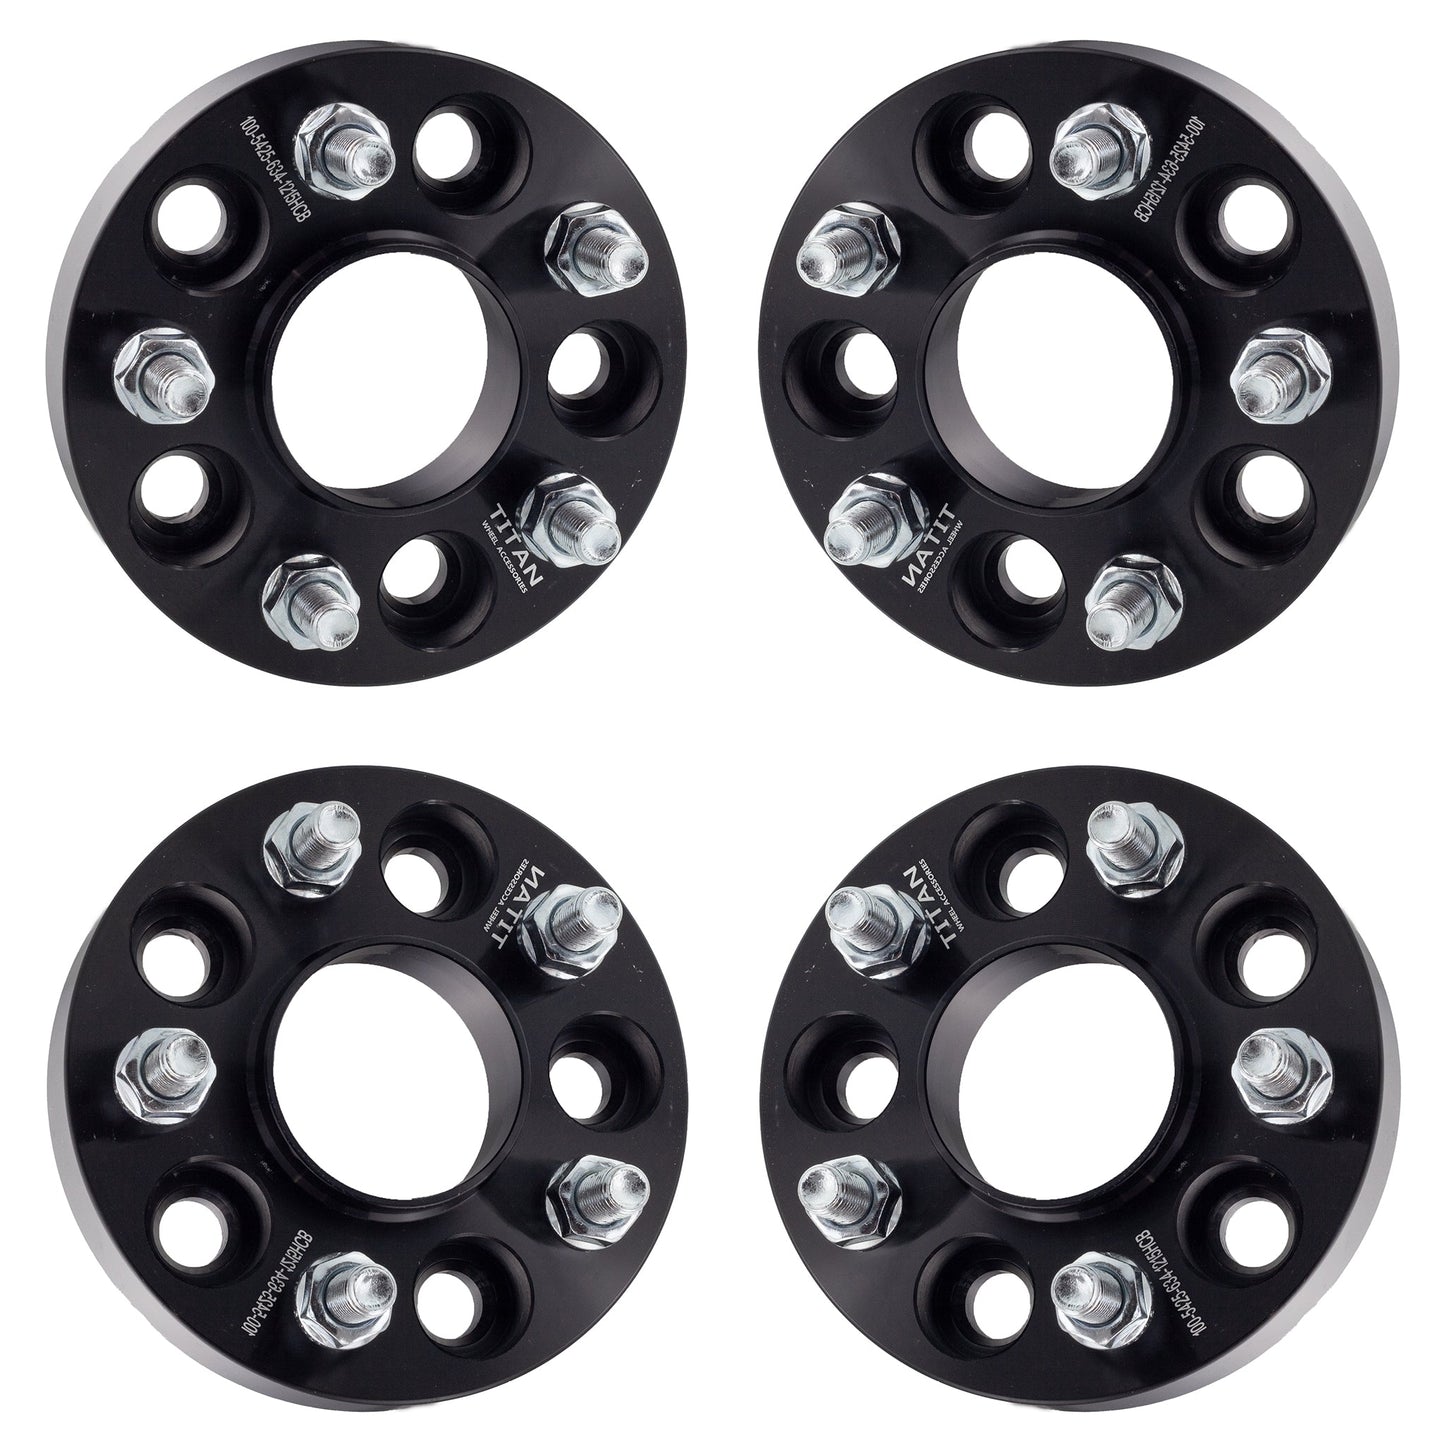 1.25" (32mm) Titan Wheel Spacers for Volvo C30 C70 S40 V50 | 5x4.25 (5x108) | 63.4 Hubcentric | 12x1.5 Studs |  Set of 4